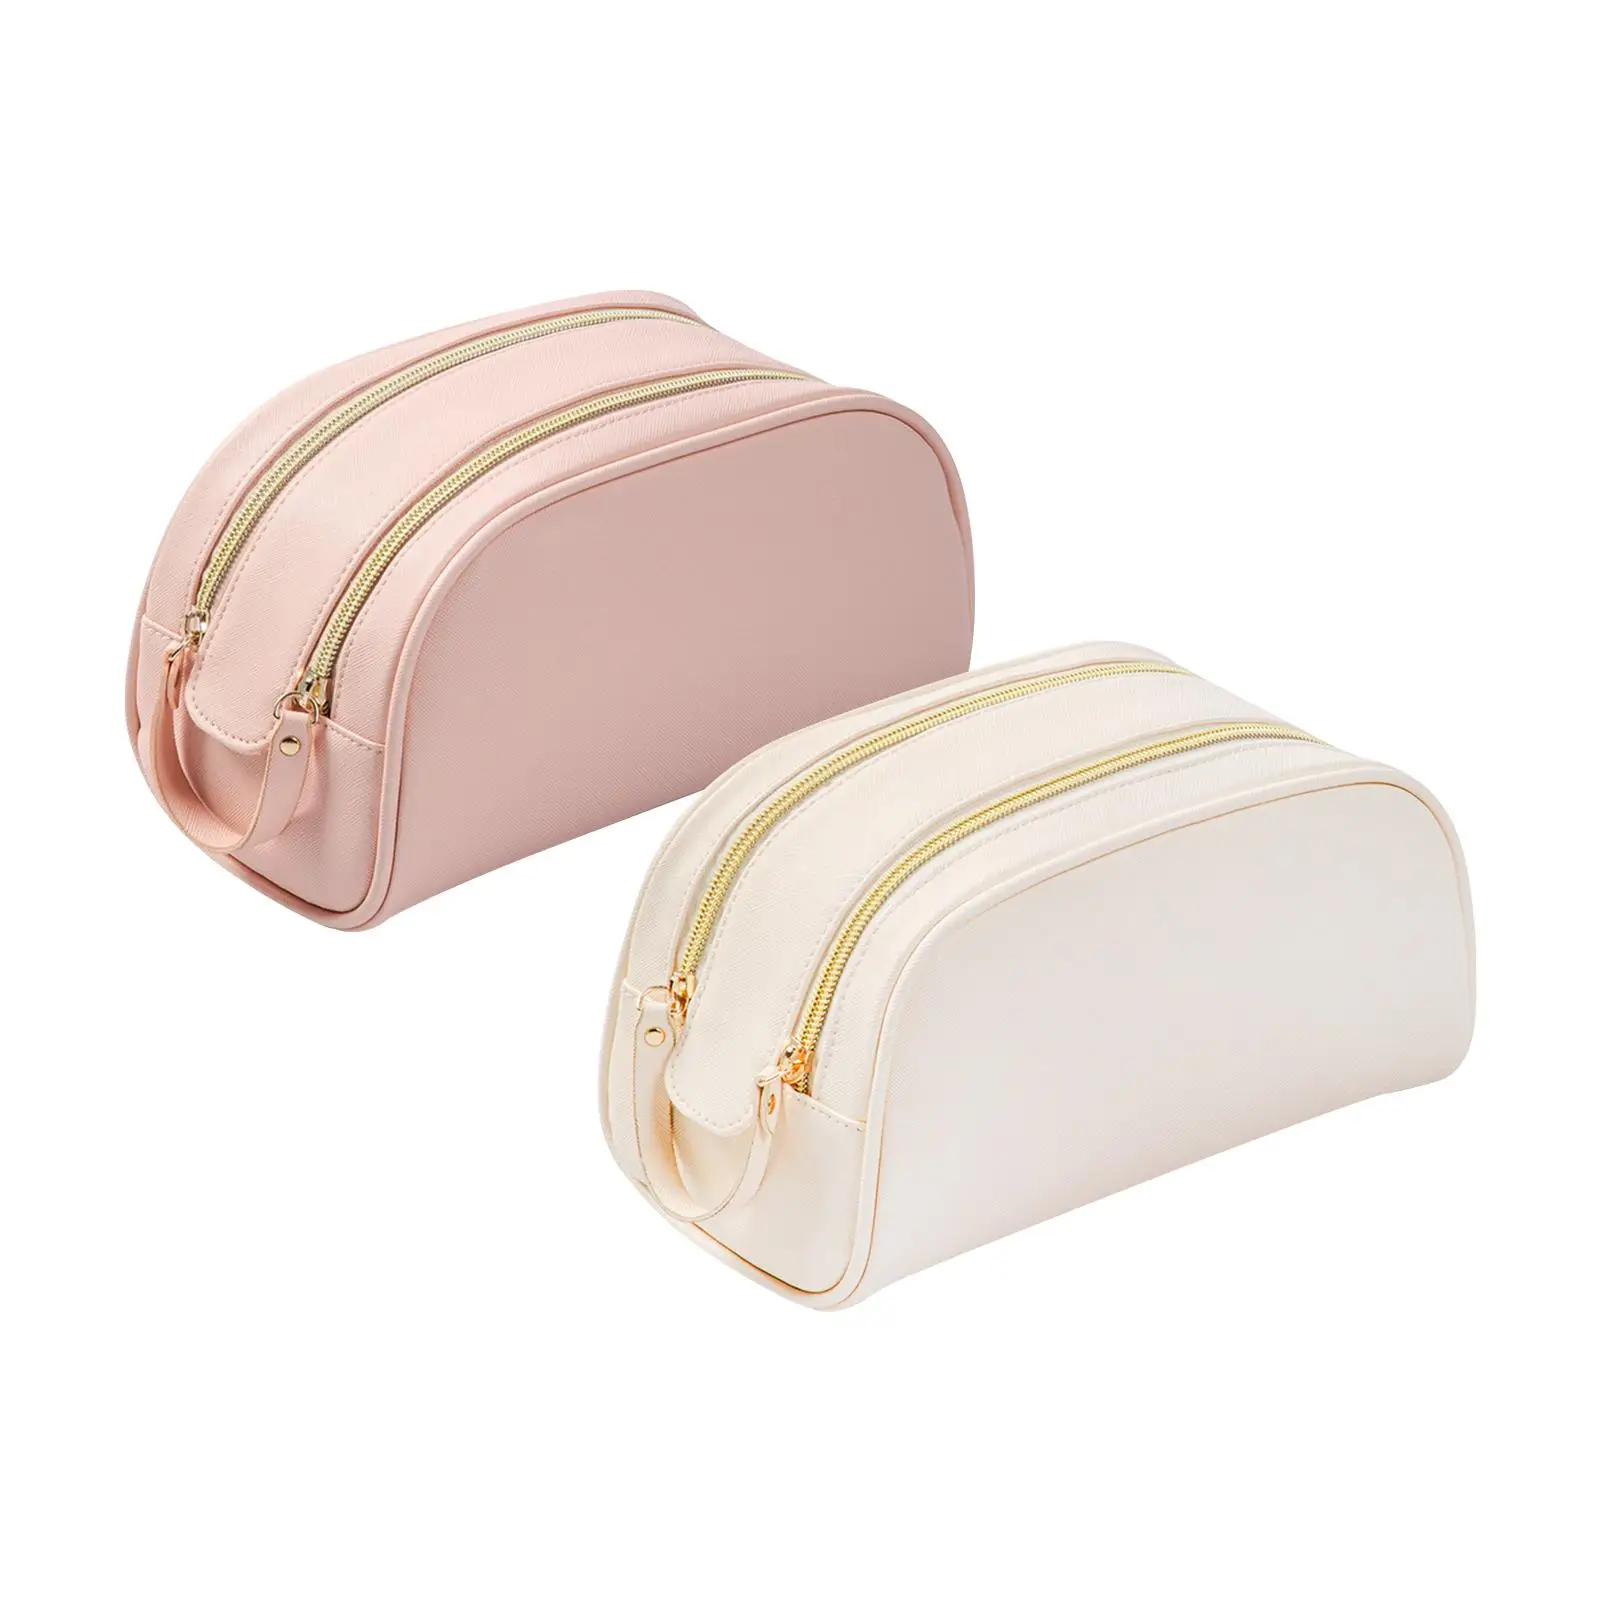 Makeup Bag Toiletry Accessories Hanging Cosmetic Bag for Travel Picnics Gym